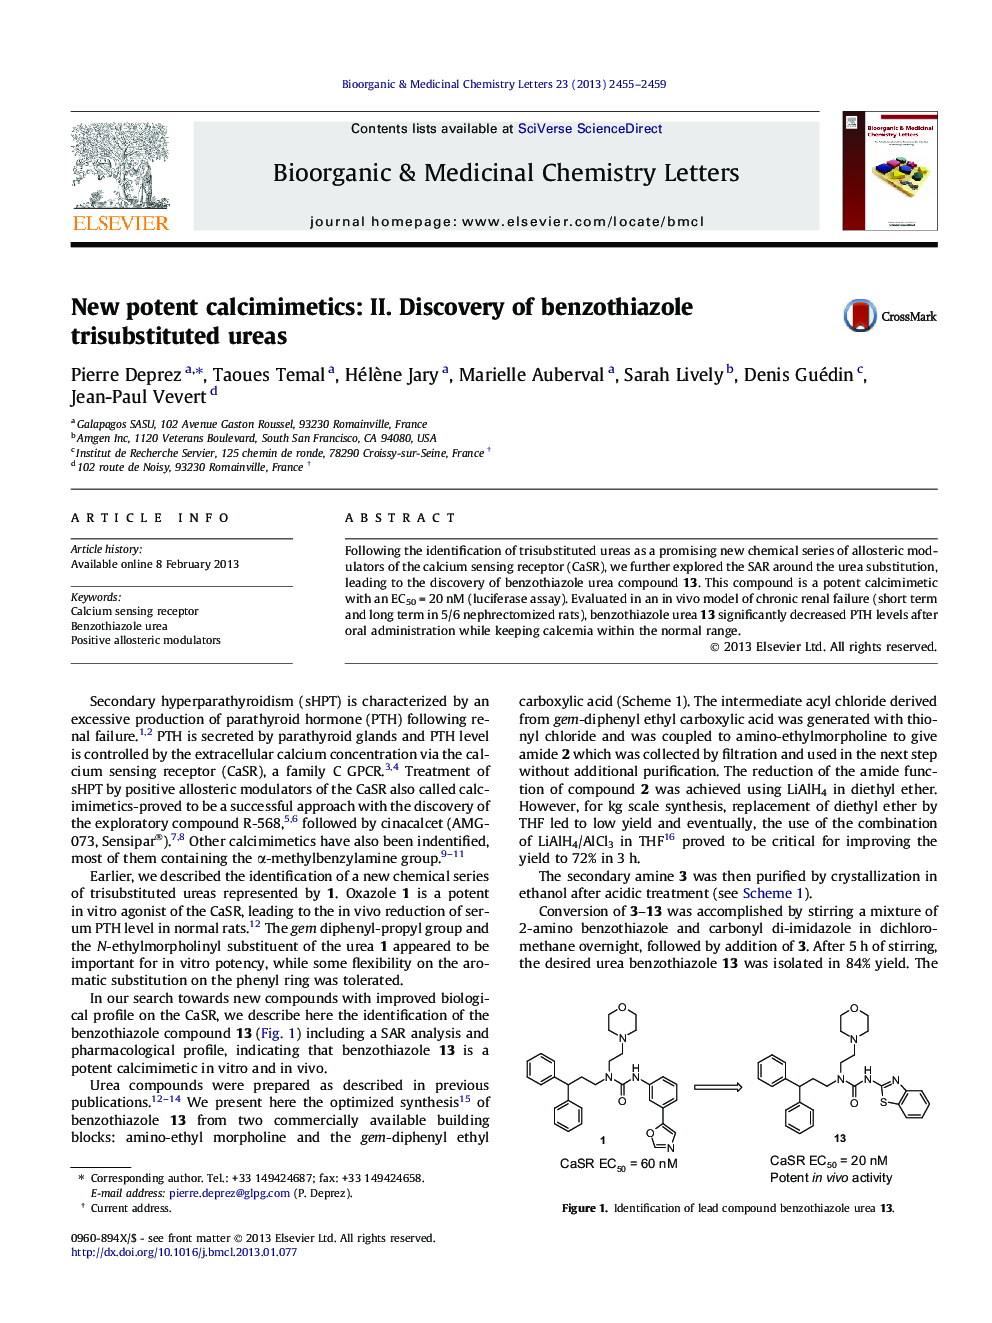 New potent calcimimetics: II. Discovery of benzothiazole trisubstituted ureas